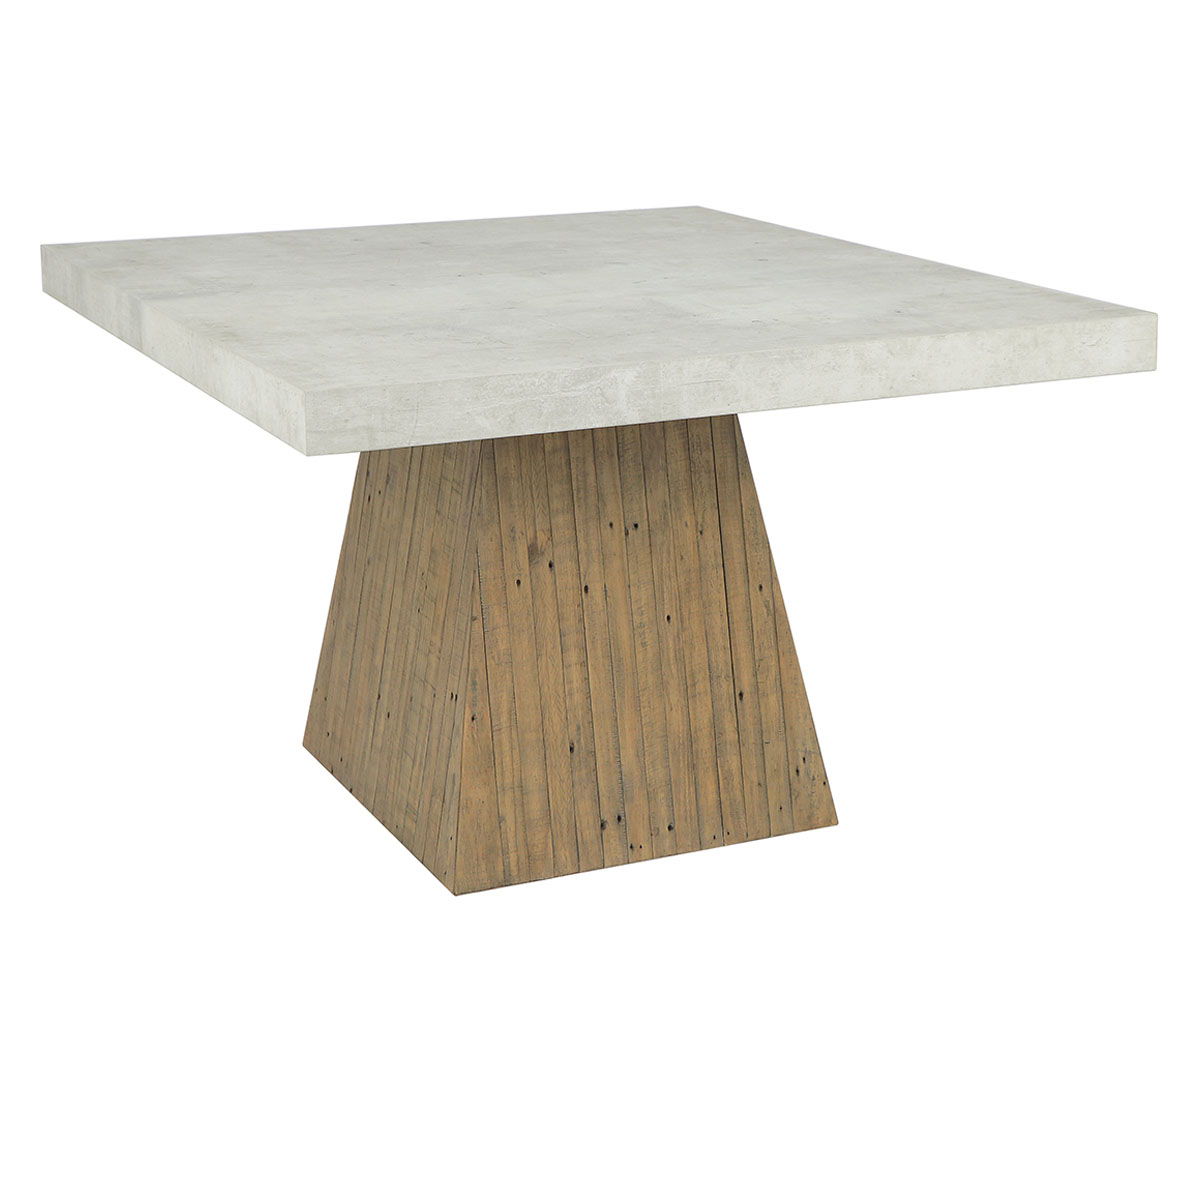 Ridley - Square Dining Table - Natural/Antique White